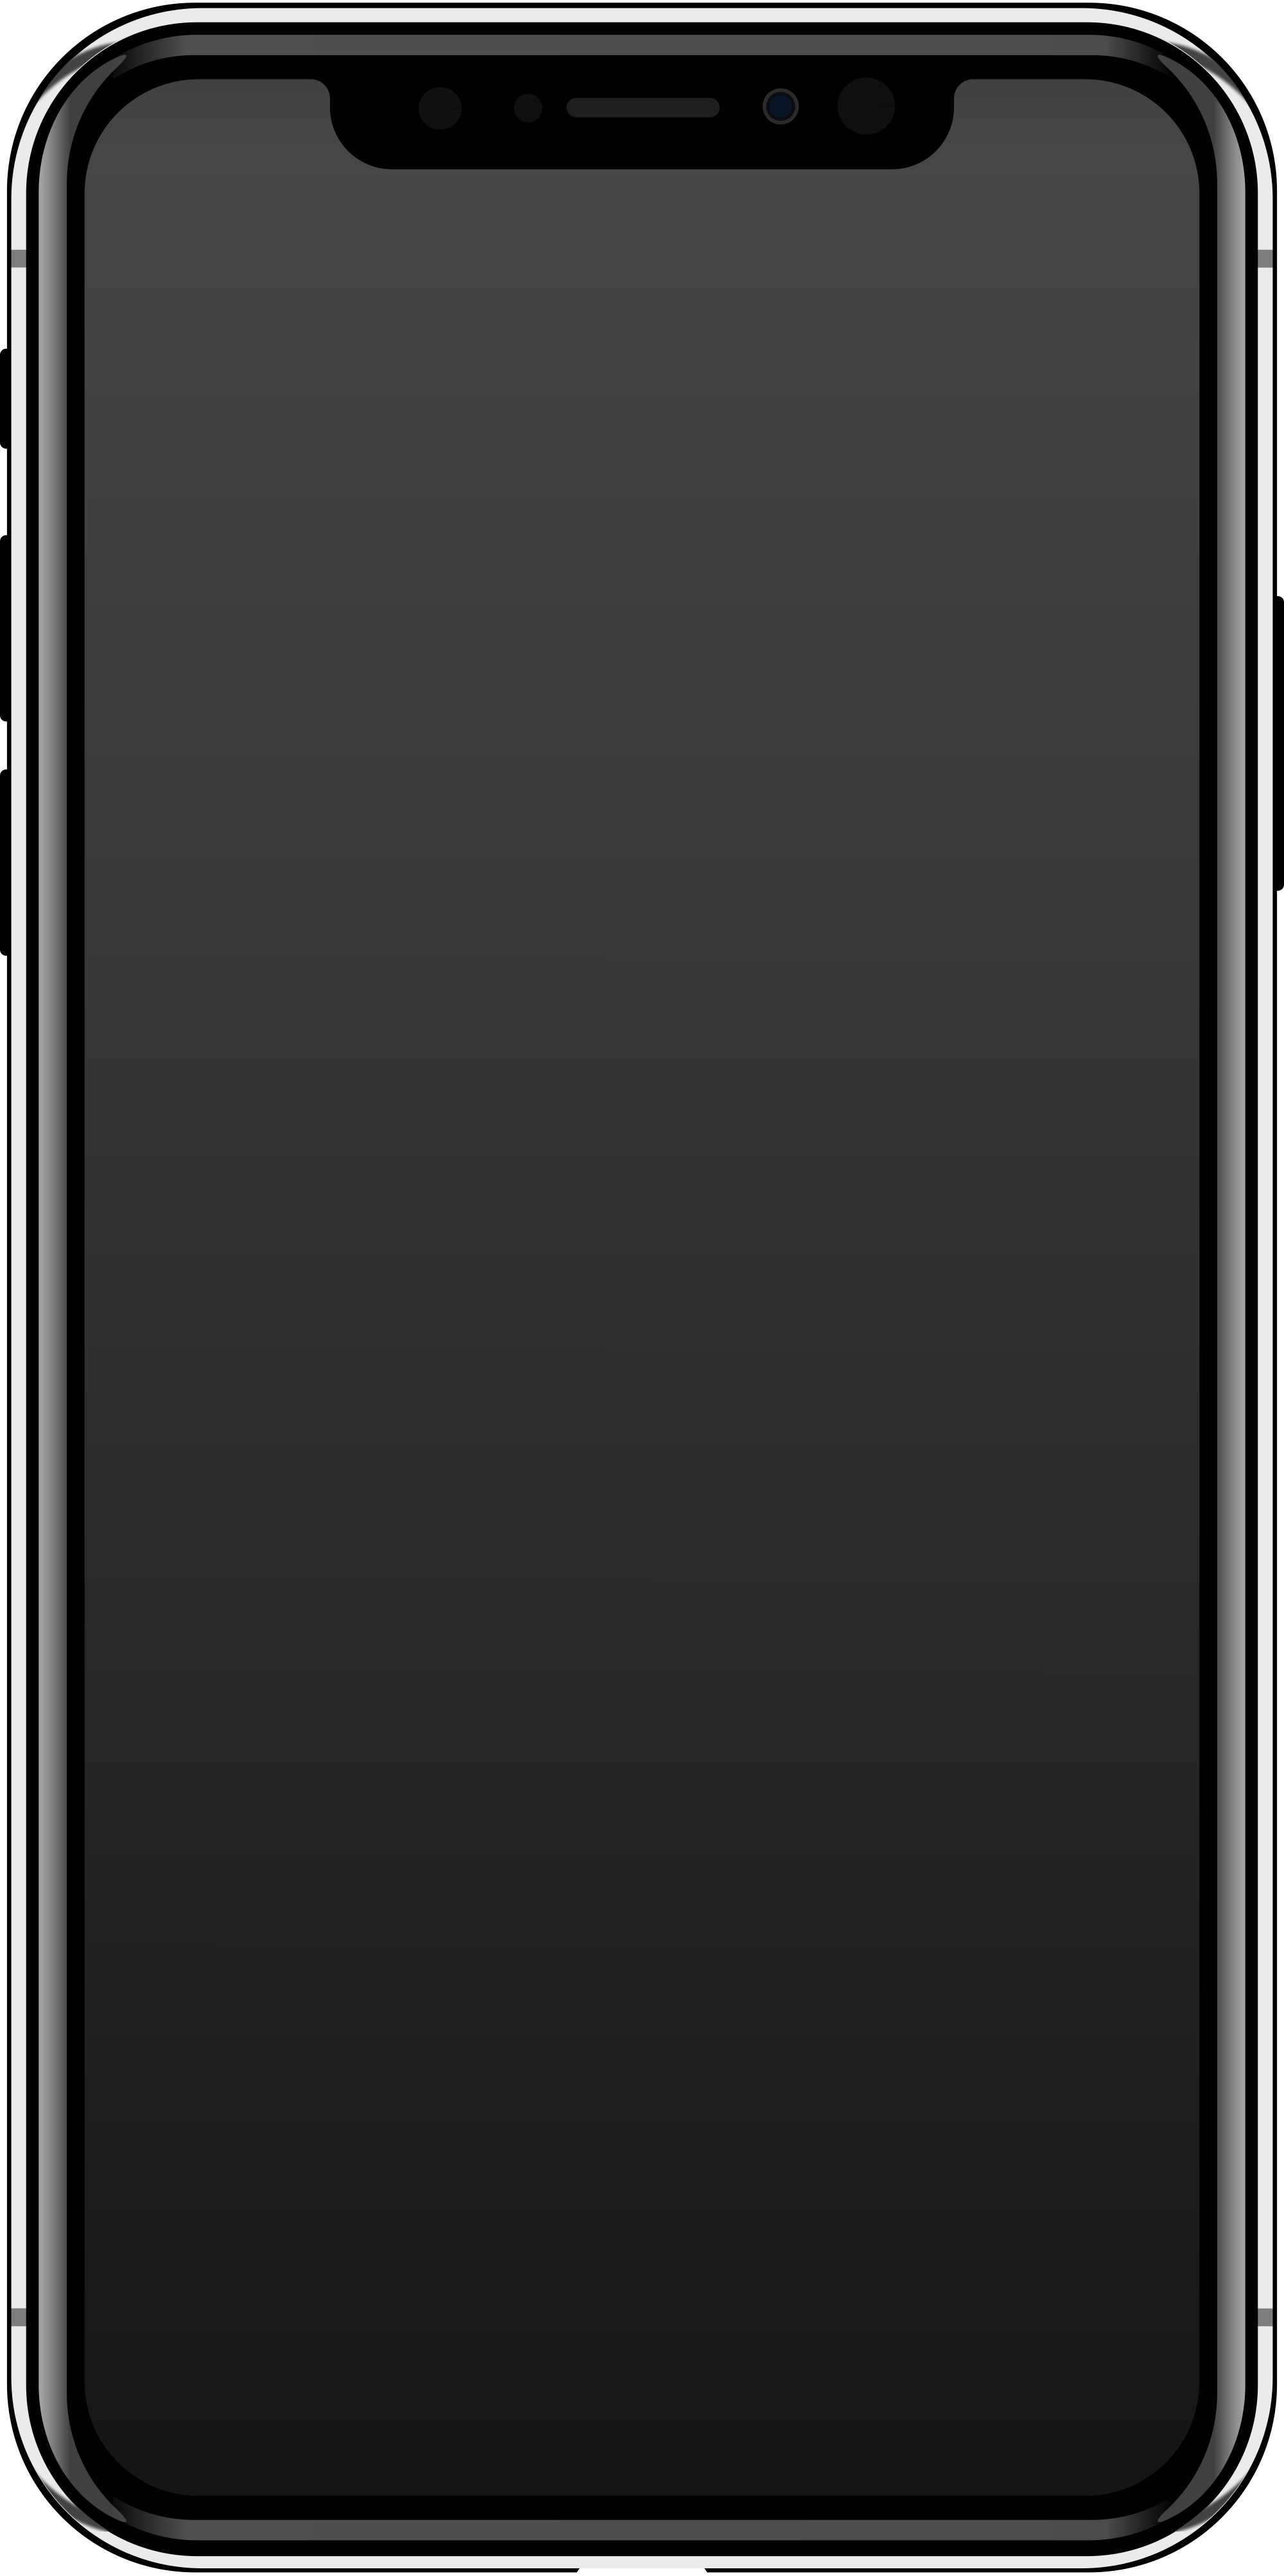 2000px-IPhone_X_vector.svg.png